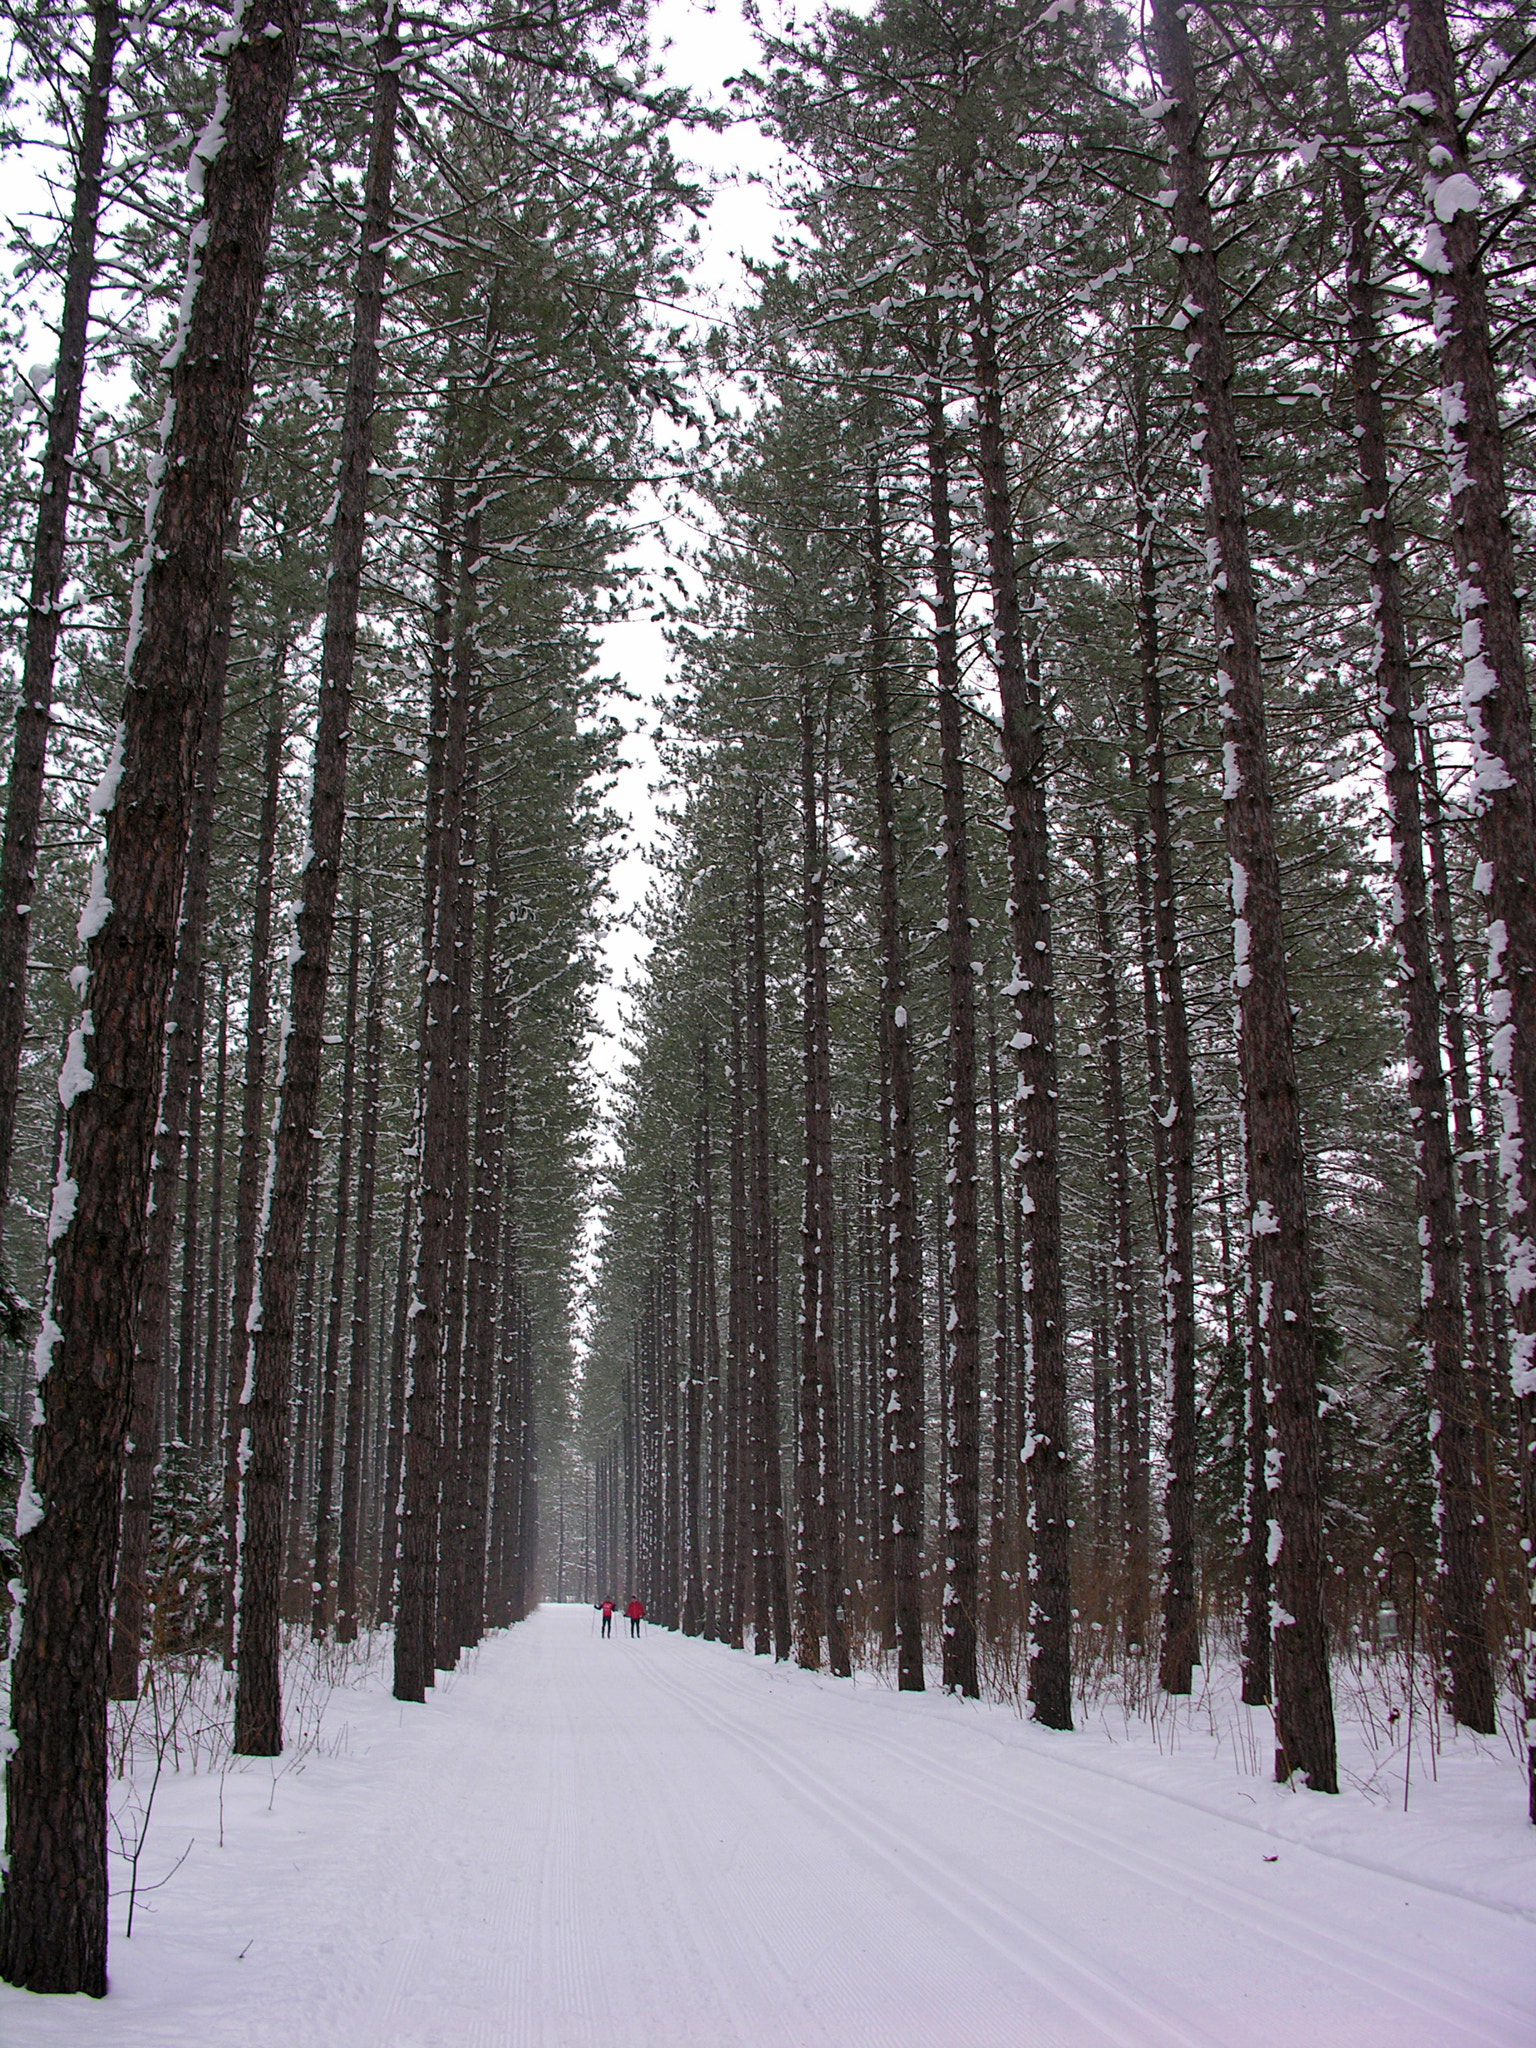 Nikon E8800 sample photo. Tall evergreen trees surround two cross-country skiers photography